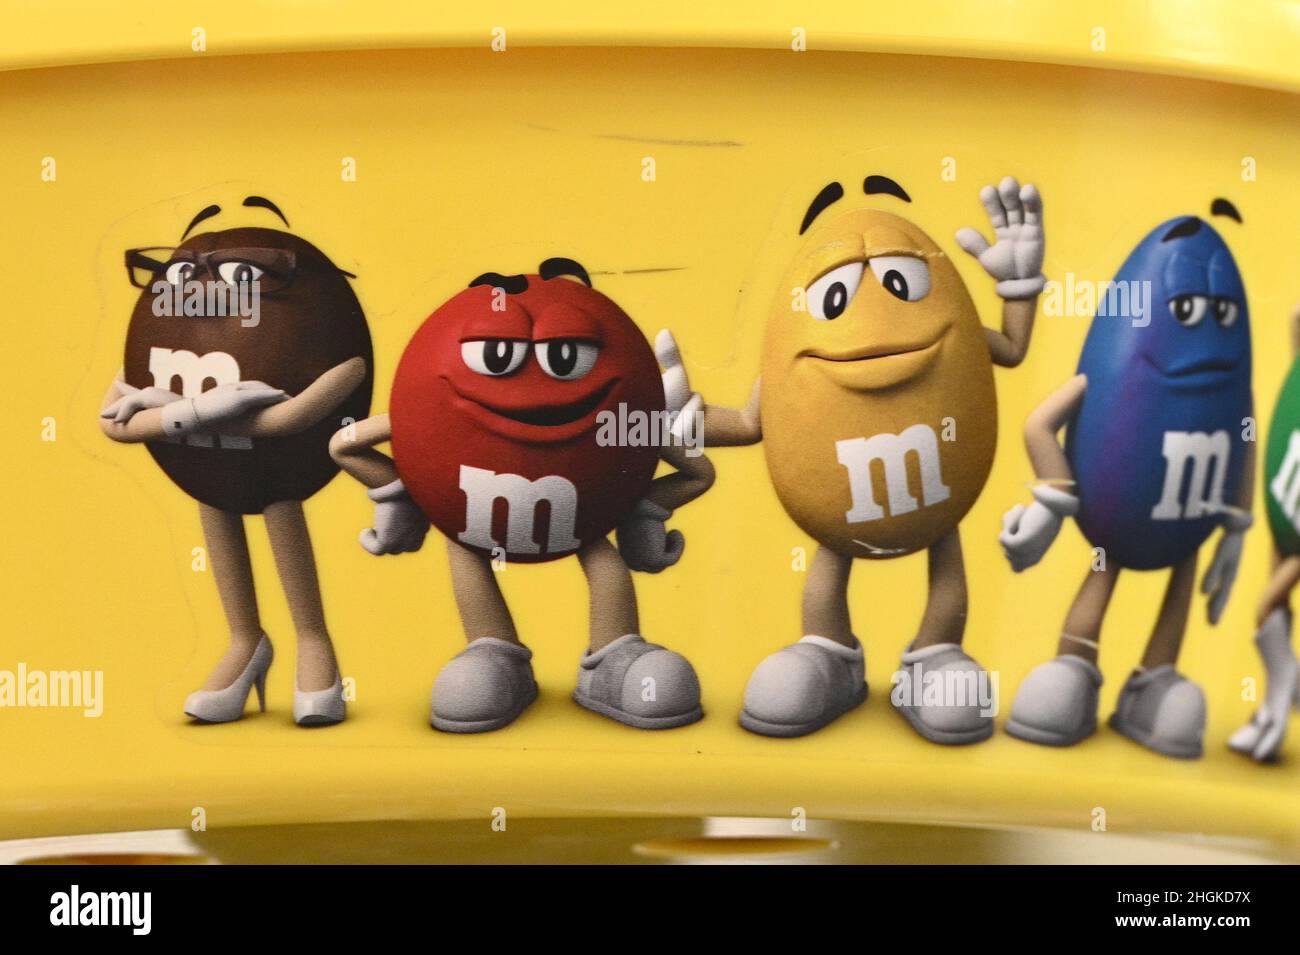 M&M's candy characters getting an updated look to be more